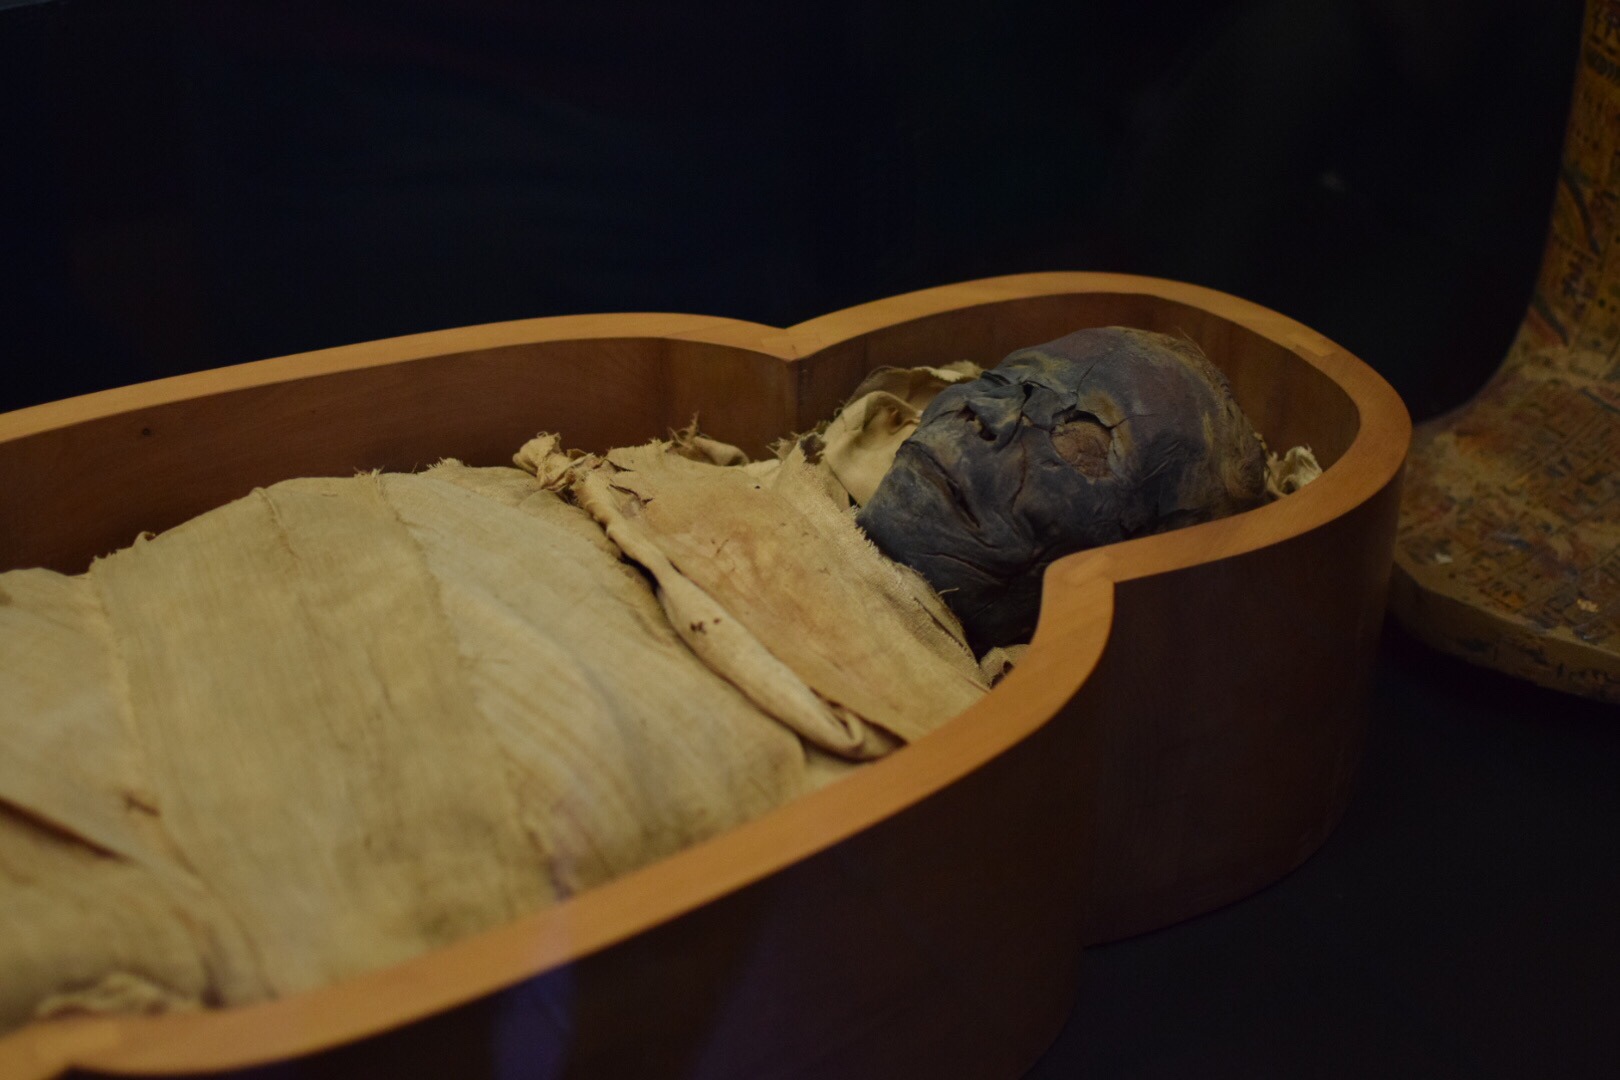 A real mummy at the Vatican Museum. It’s not actually a museum full of icons and old religious artifacts, but donations of history from throughout the centuries.